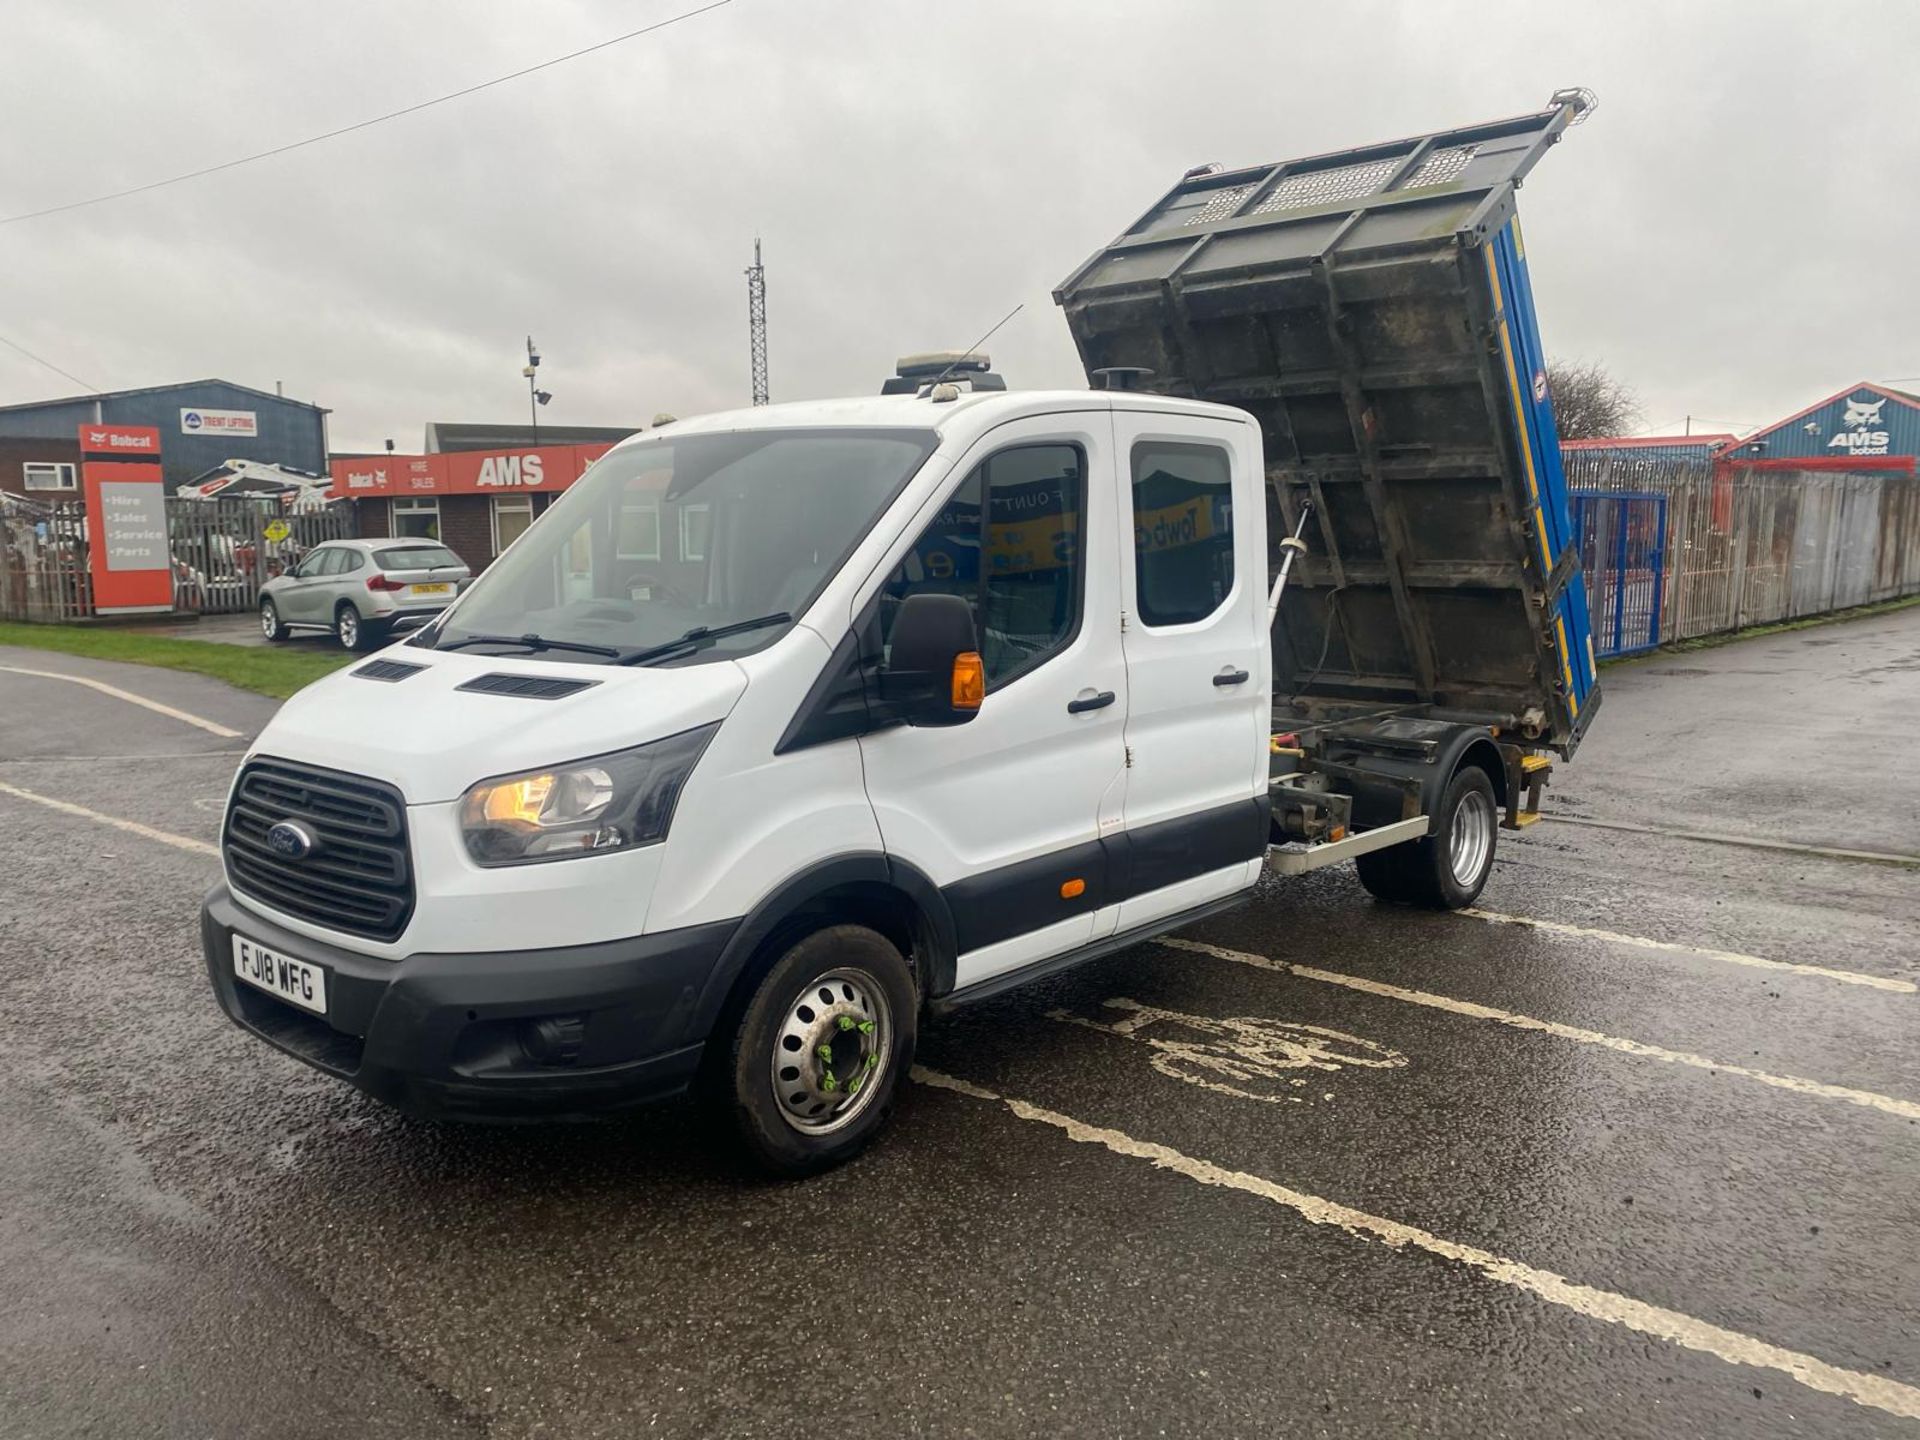 2018 18 FORD TRANSIT 470 TIPPER - 90K MILES - 4.7 TON GROSS - 3 SEATS - RARE TIPPER - TOWBAR - Image 3 of 15